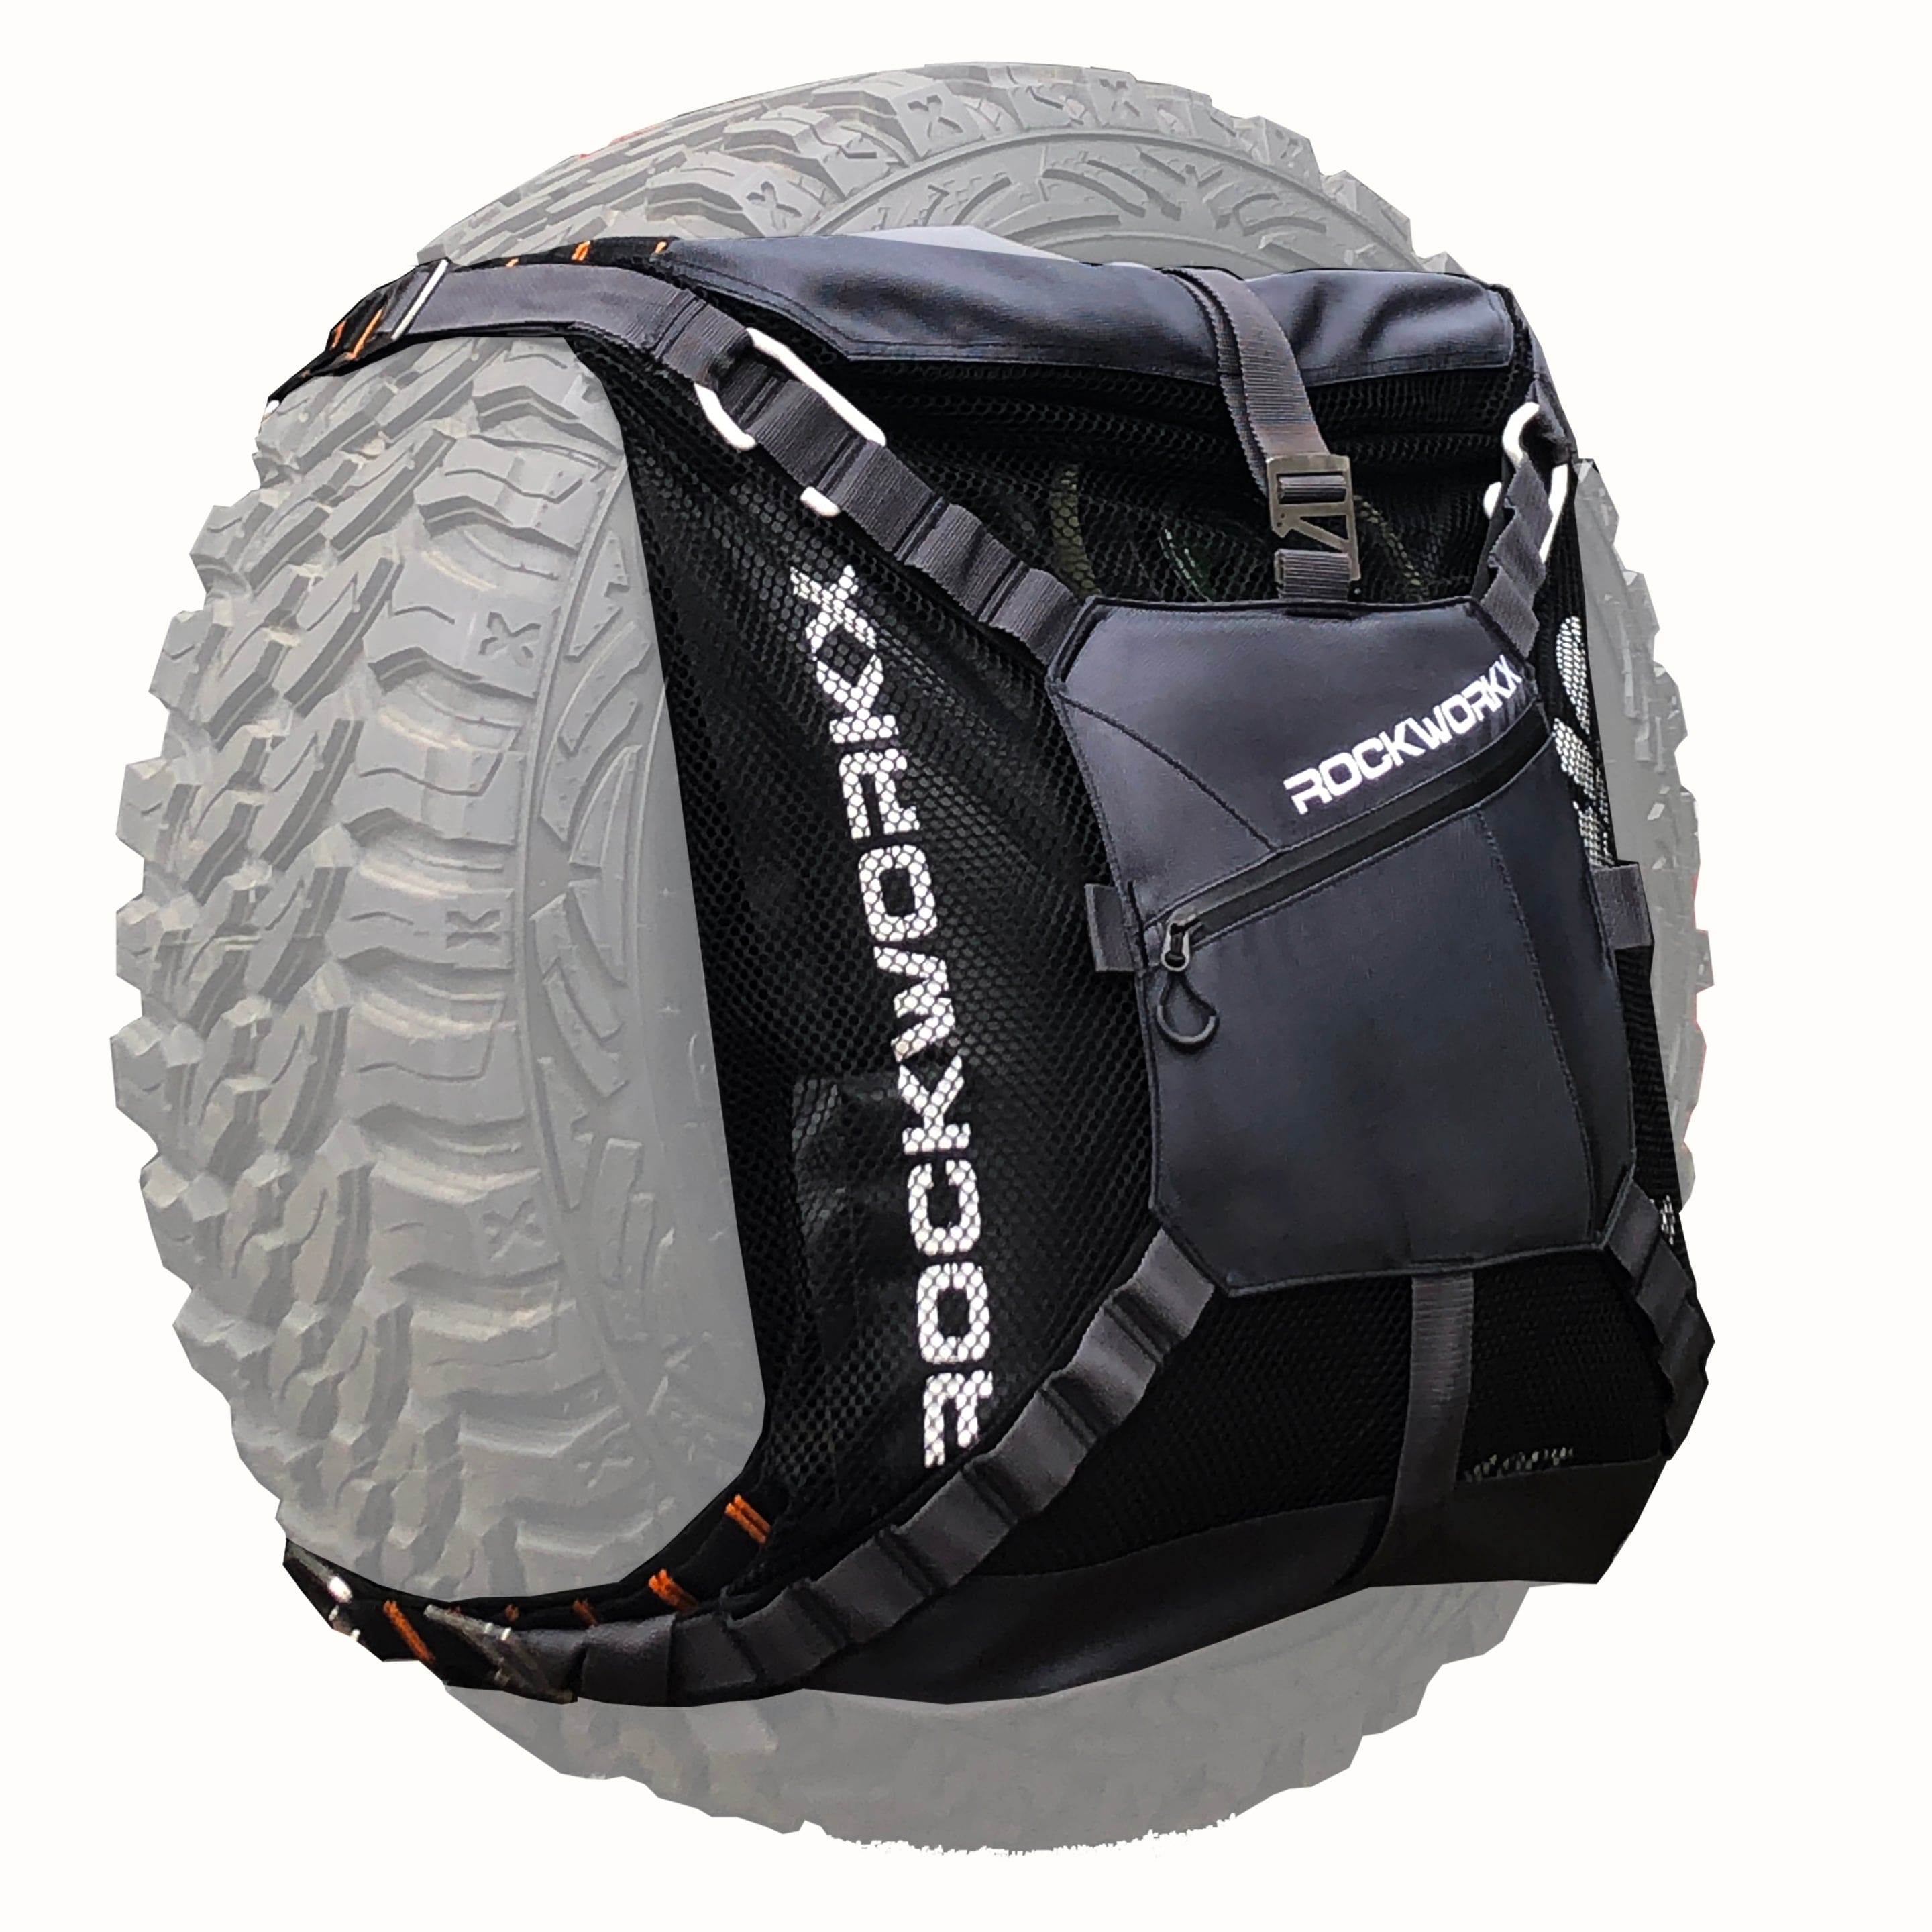 10 Gallon Water + Harness and Bag System - Available for PRE-ORDER! rockworkx